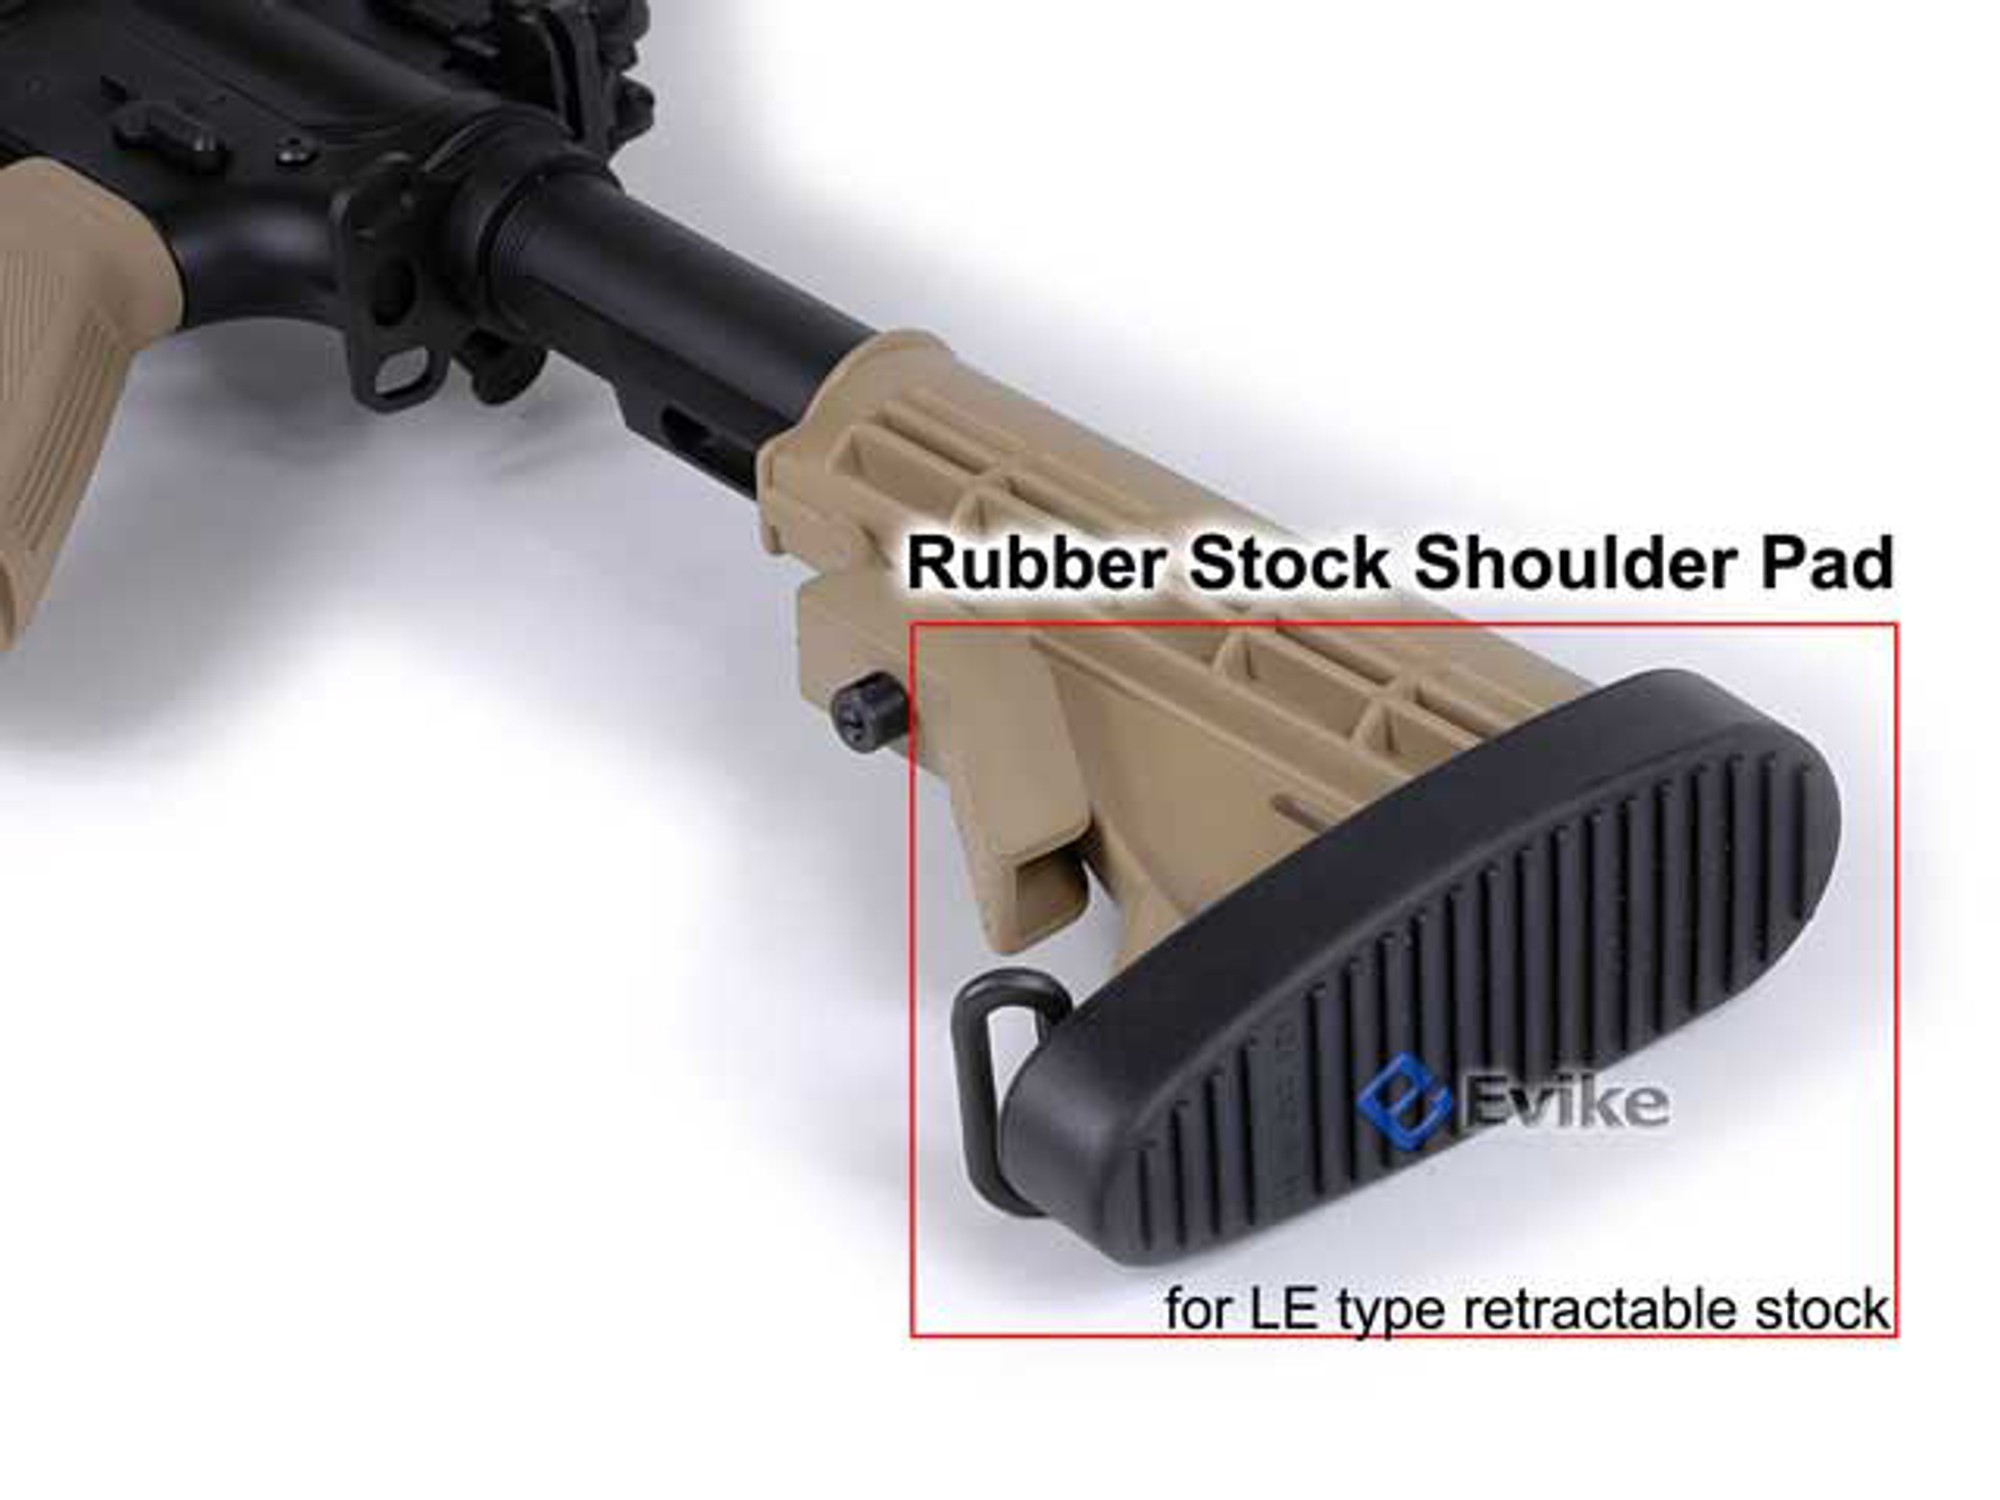 AIM Sports Real Shooter Rubber Stock Shoulder Pad for M4 / CAR-16 LE Stock.